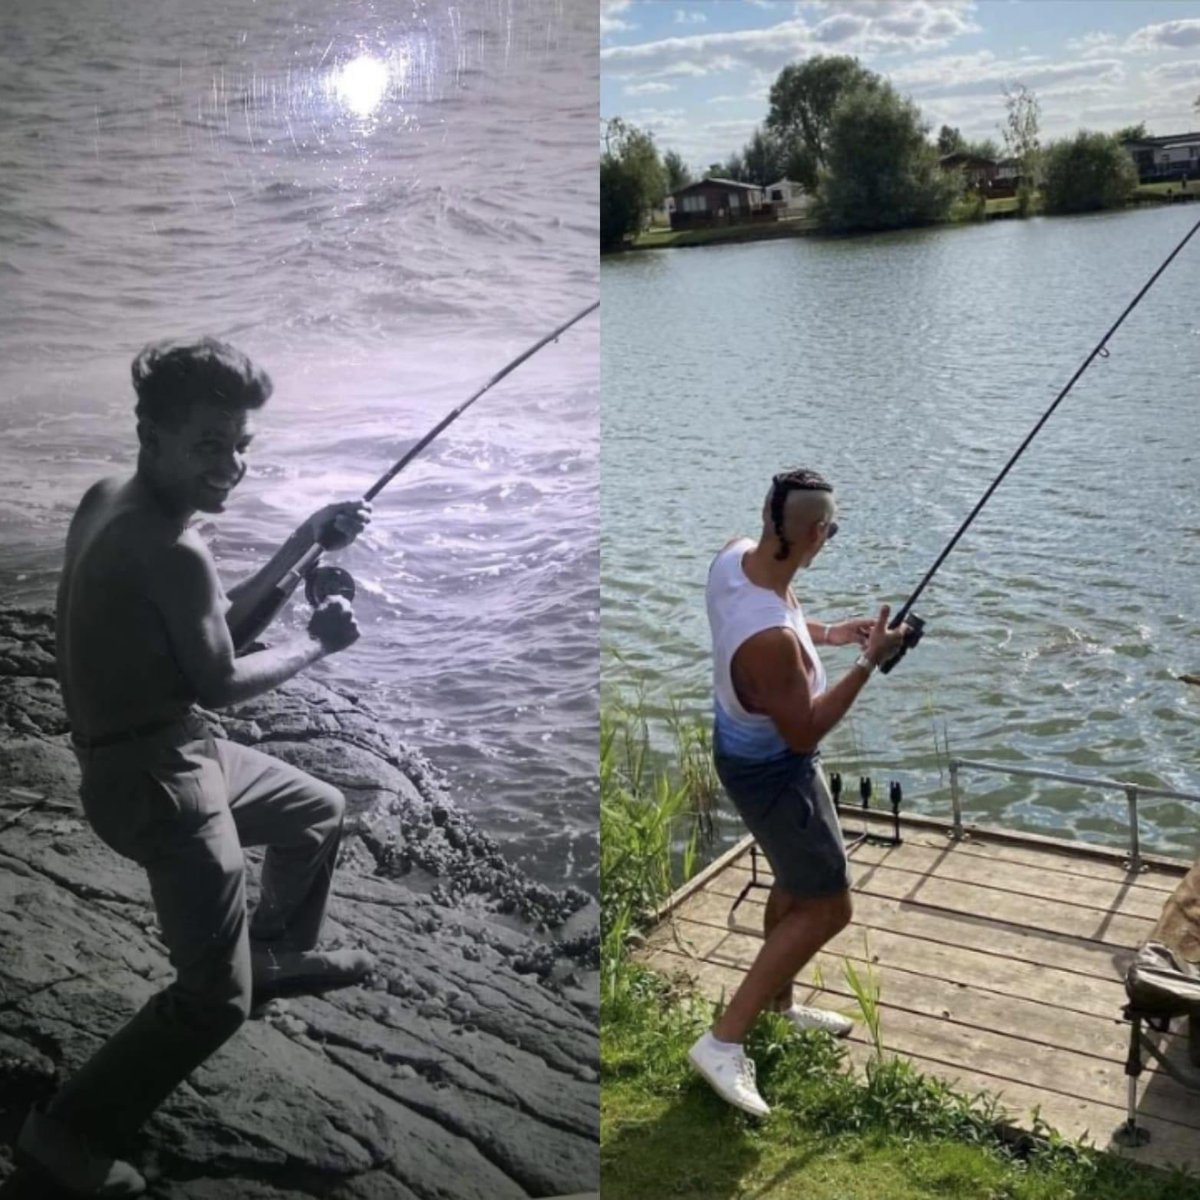 My dad.. my son.. many years apart clearly. Just a lovely photo.. the apple doesn’t fall far from the tree ❤️ #MyDadMySon #fishinglife #Fishing #Seafishing #FreshWaterFishing 🎣🎣🎣